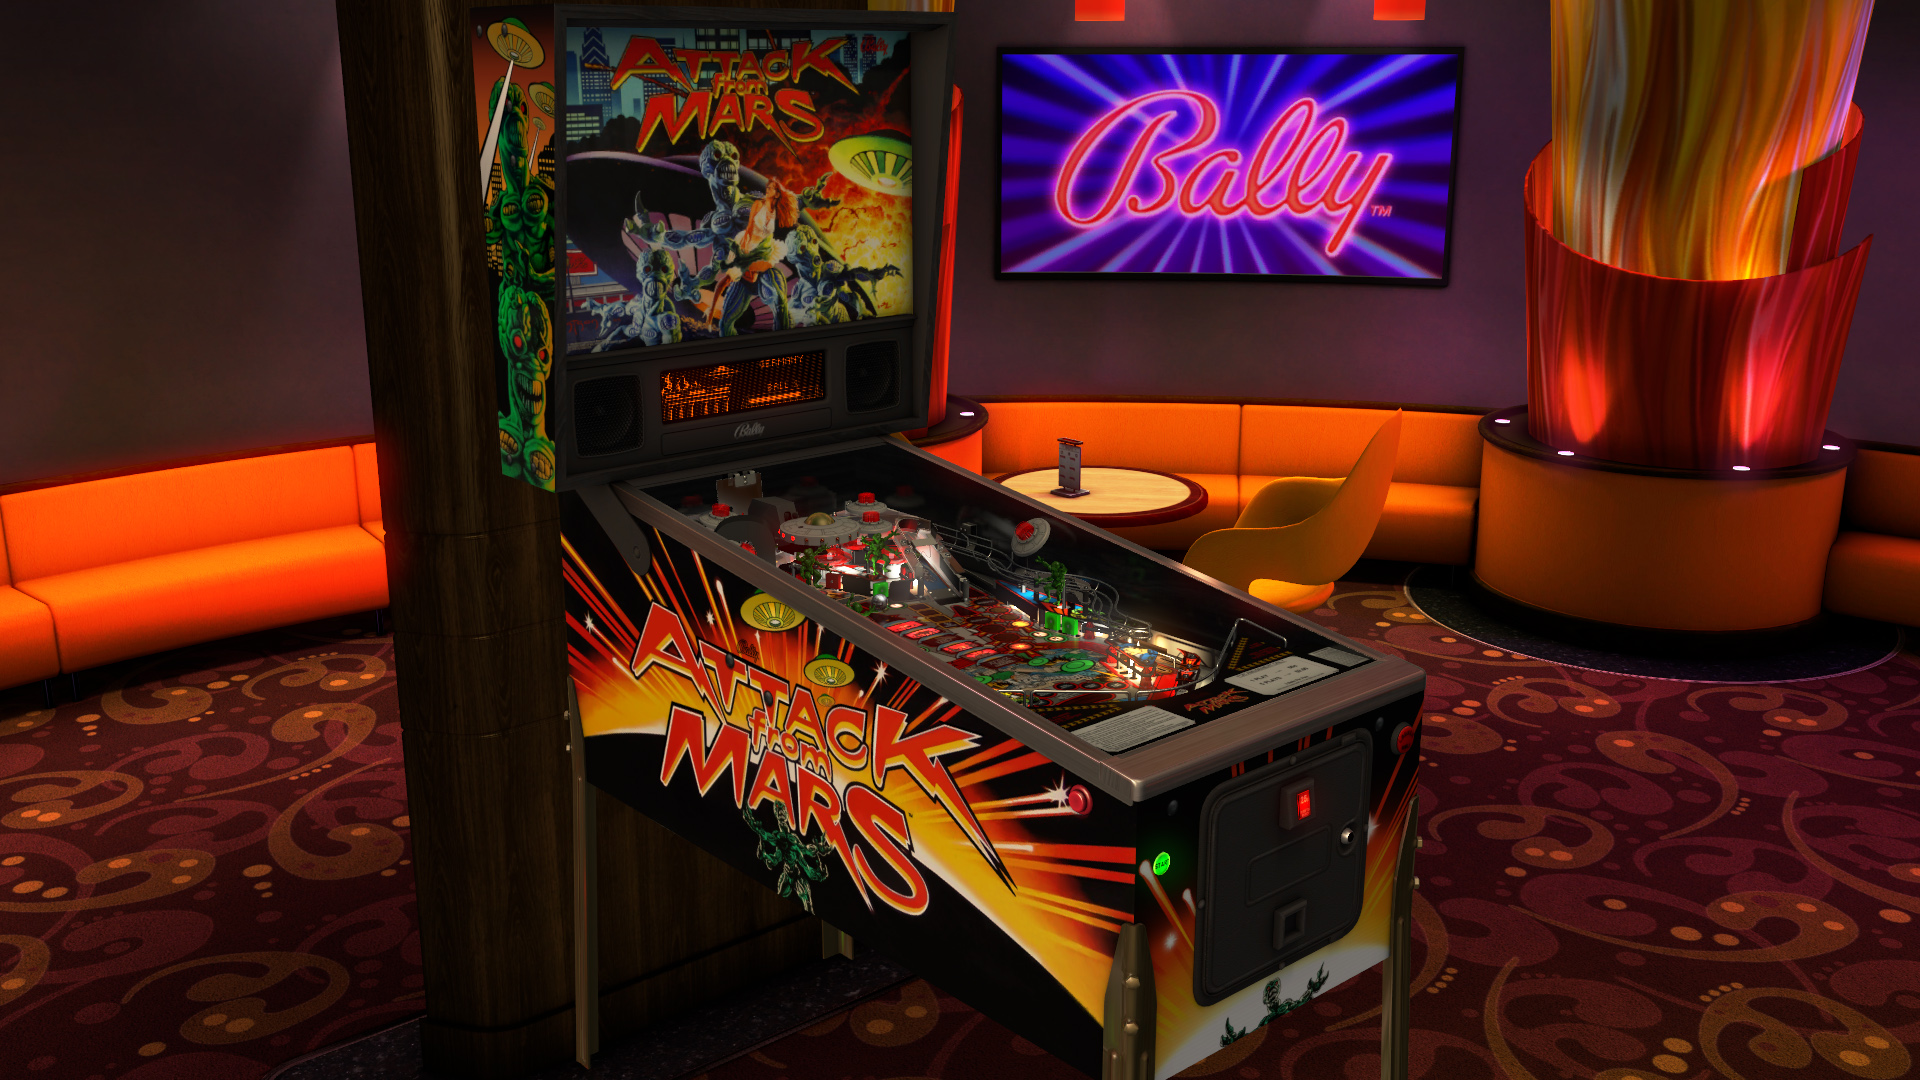 Game - Pinball - Space - Other Games - Room2Play